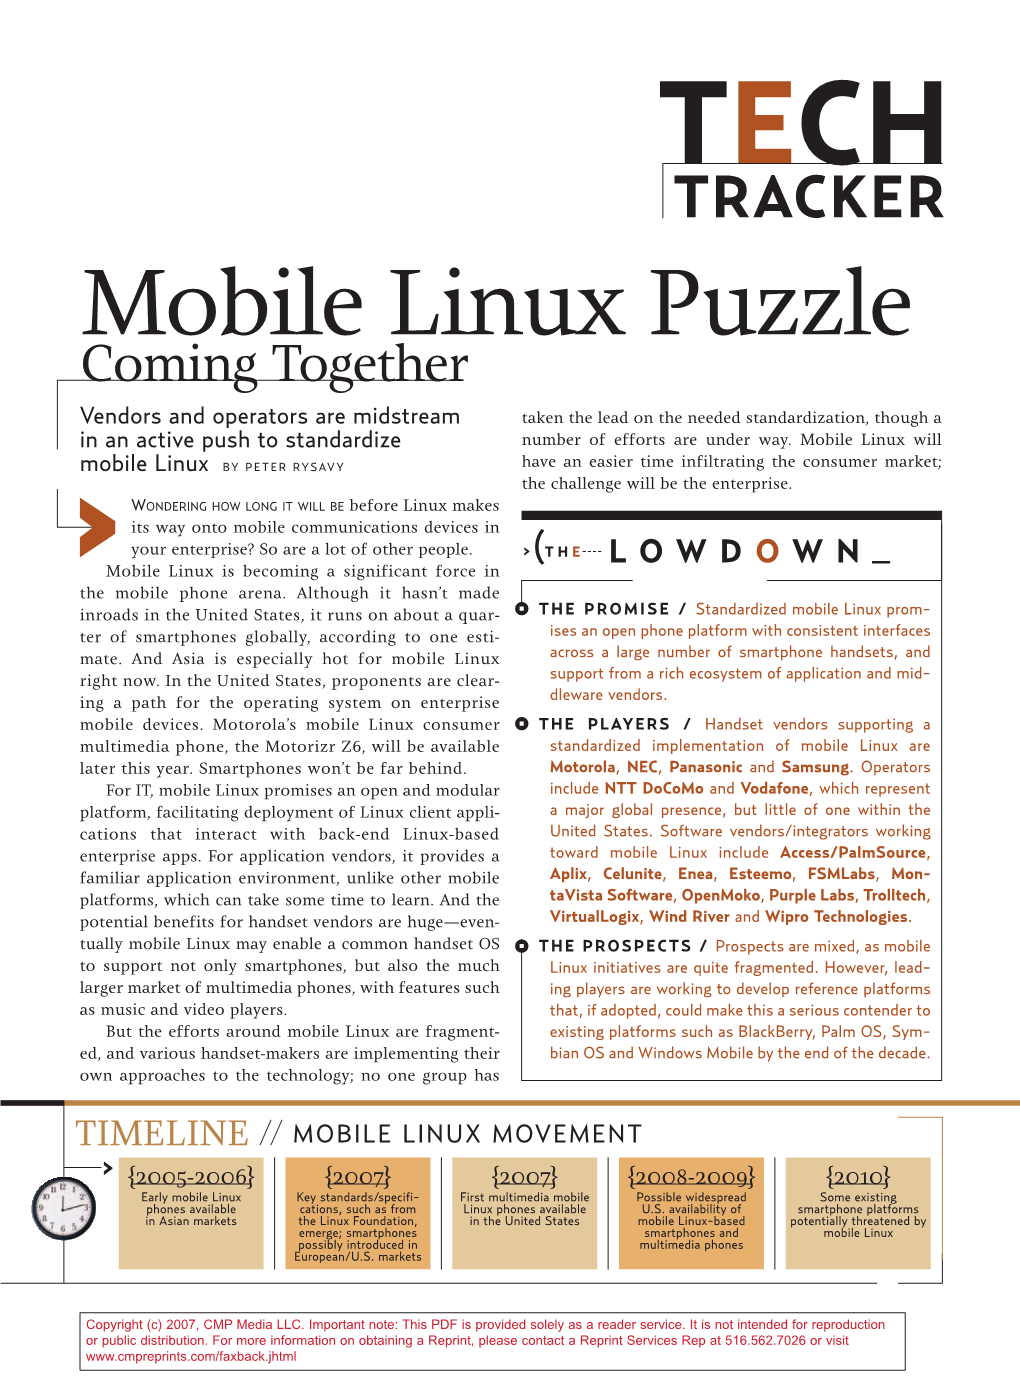 Mobile Linux Puzzle Coming Together